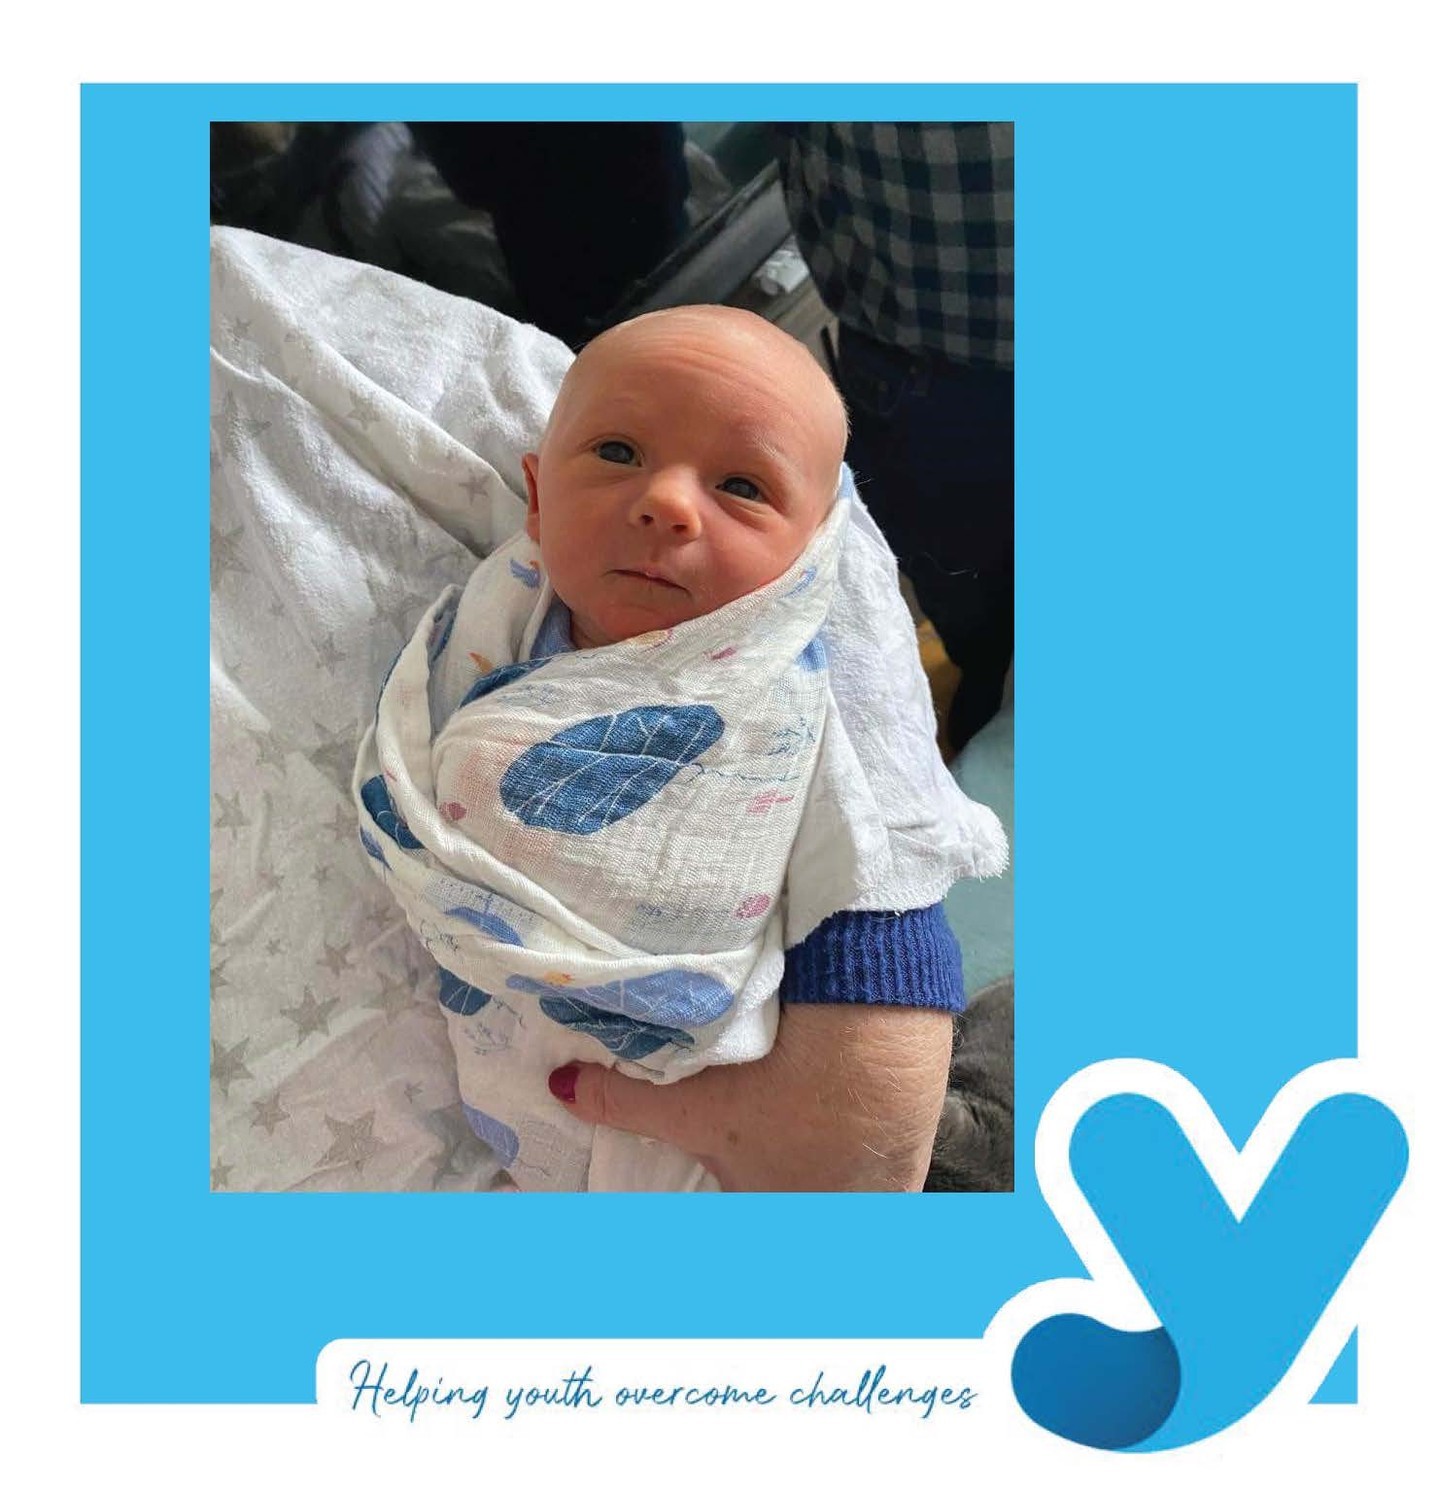 Amanda and Ryan welcomed our youngest outreach worker on December 26th and all are hanging in there.  Welcome to our crazy world Aidan, let's hope things get better for you.